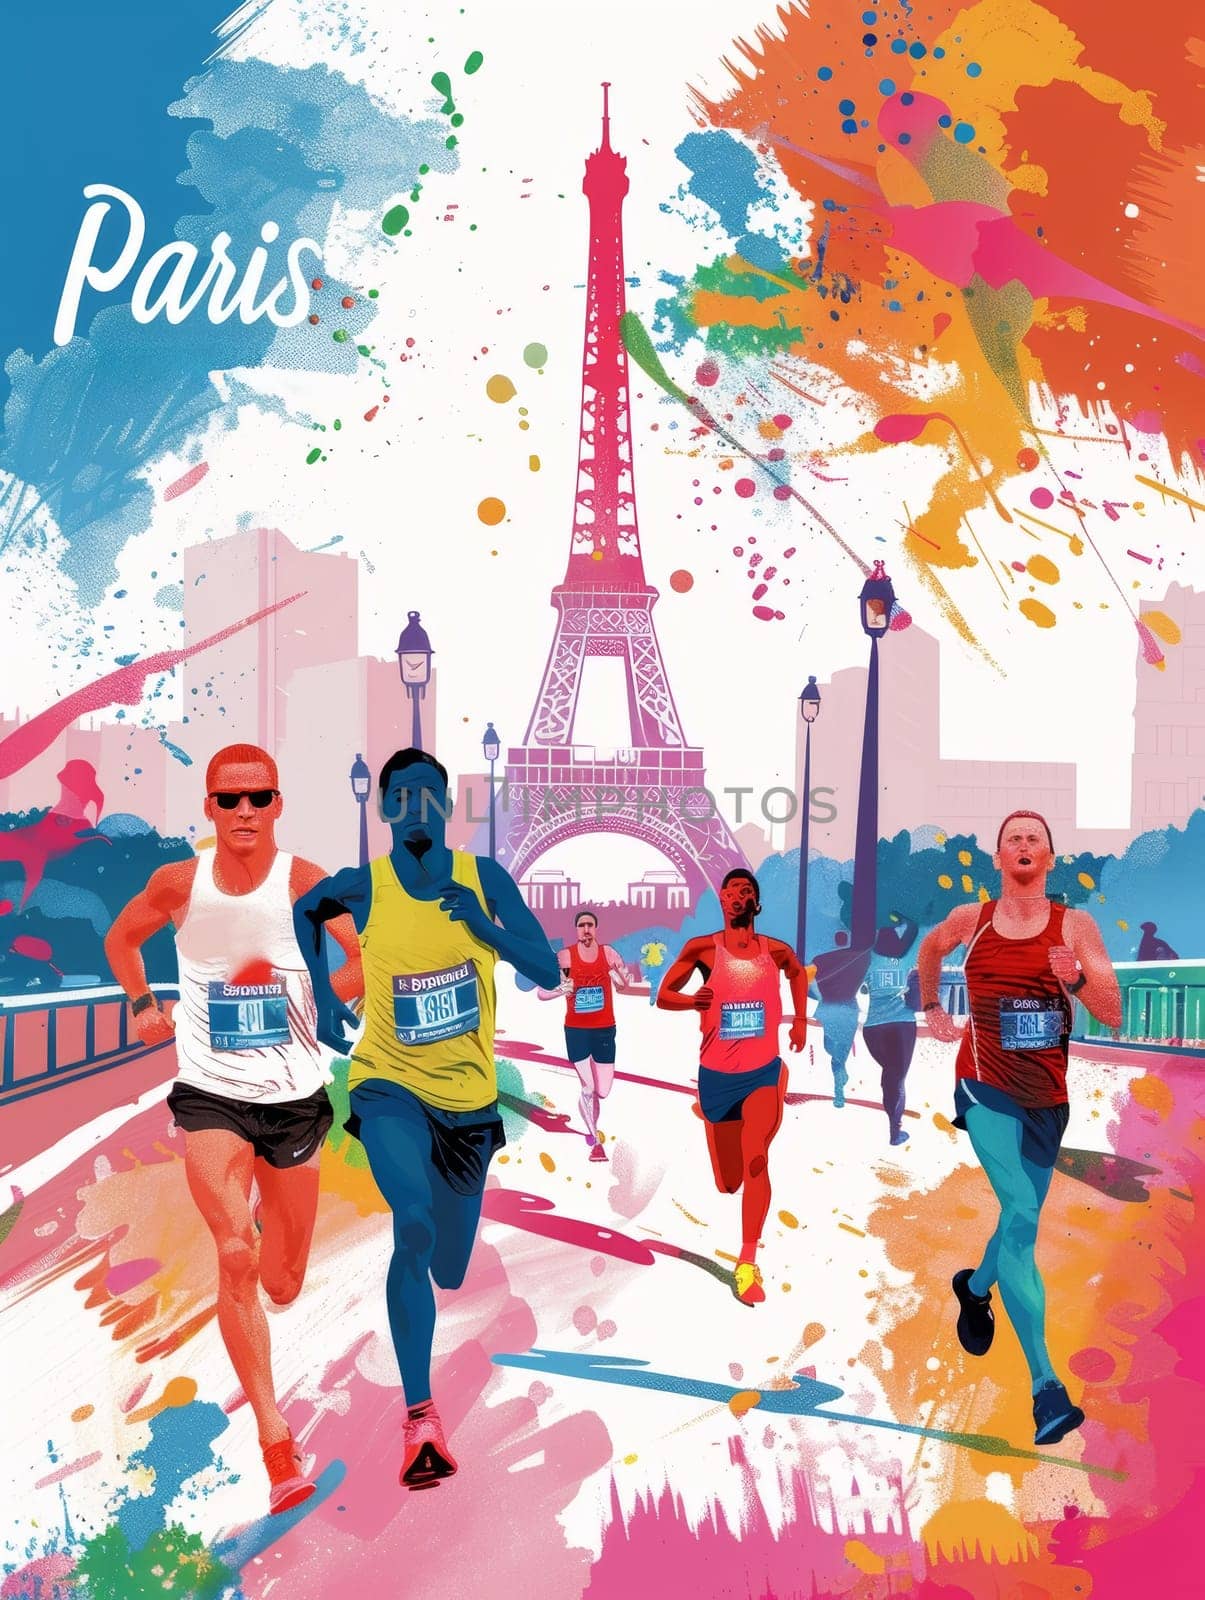 Artistic depiction of marathon runners in motion against a splash of colors with the Eiffel Tower setting the scene